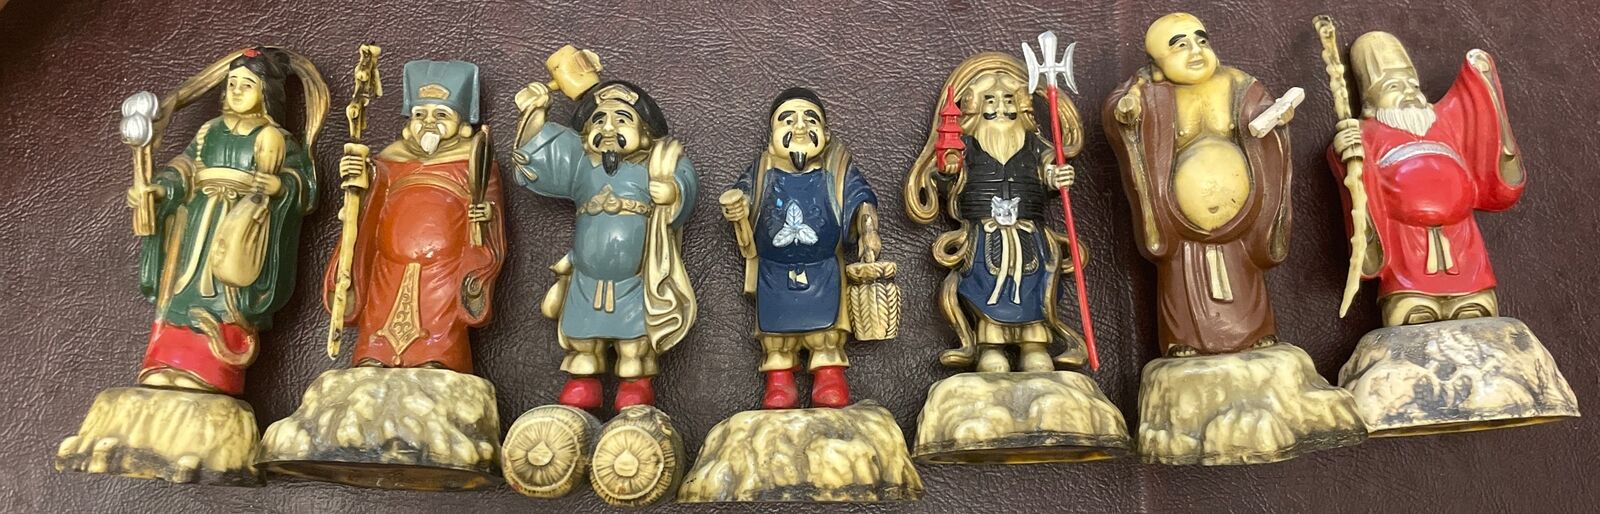 7 SEVEN LUCKY GODS OF HAPPINESS & GOOD FORTUNE MINI FIGURINES